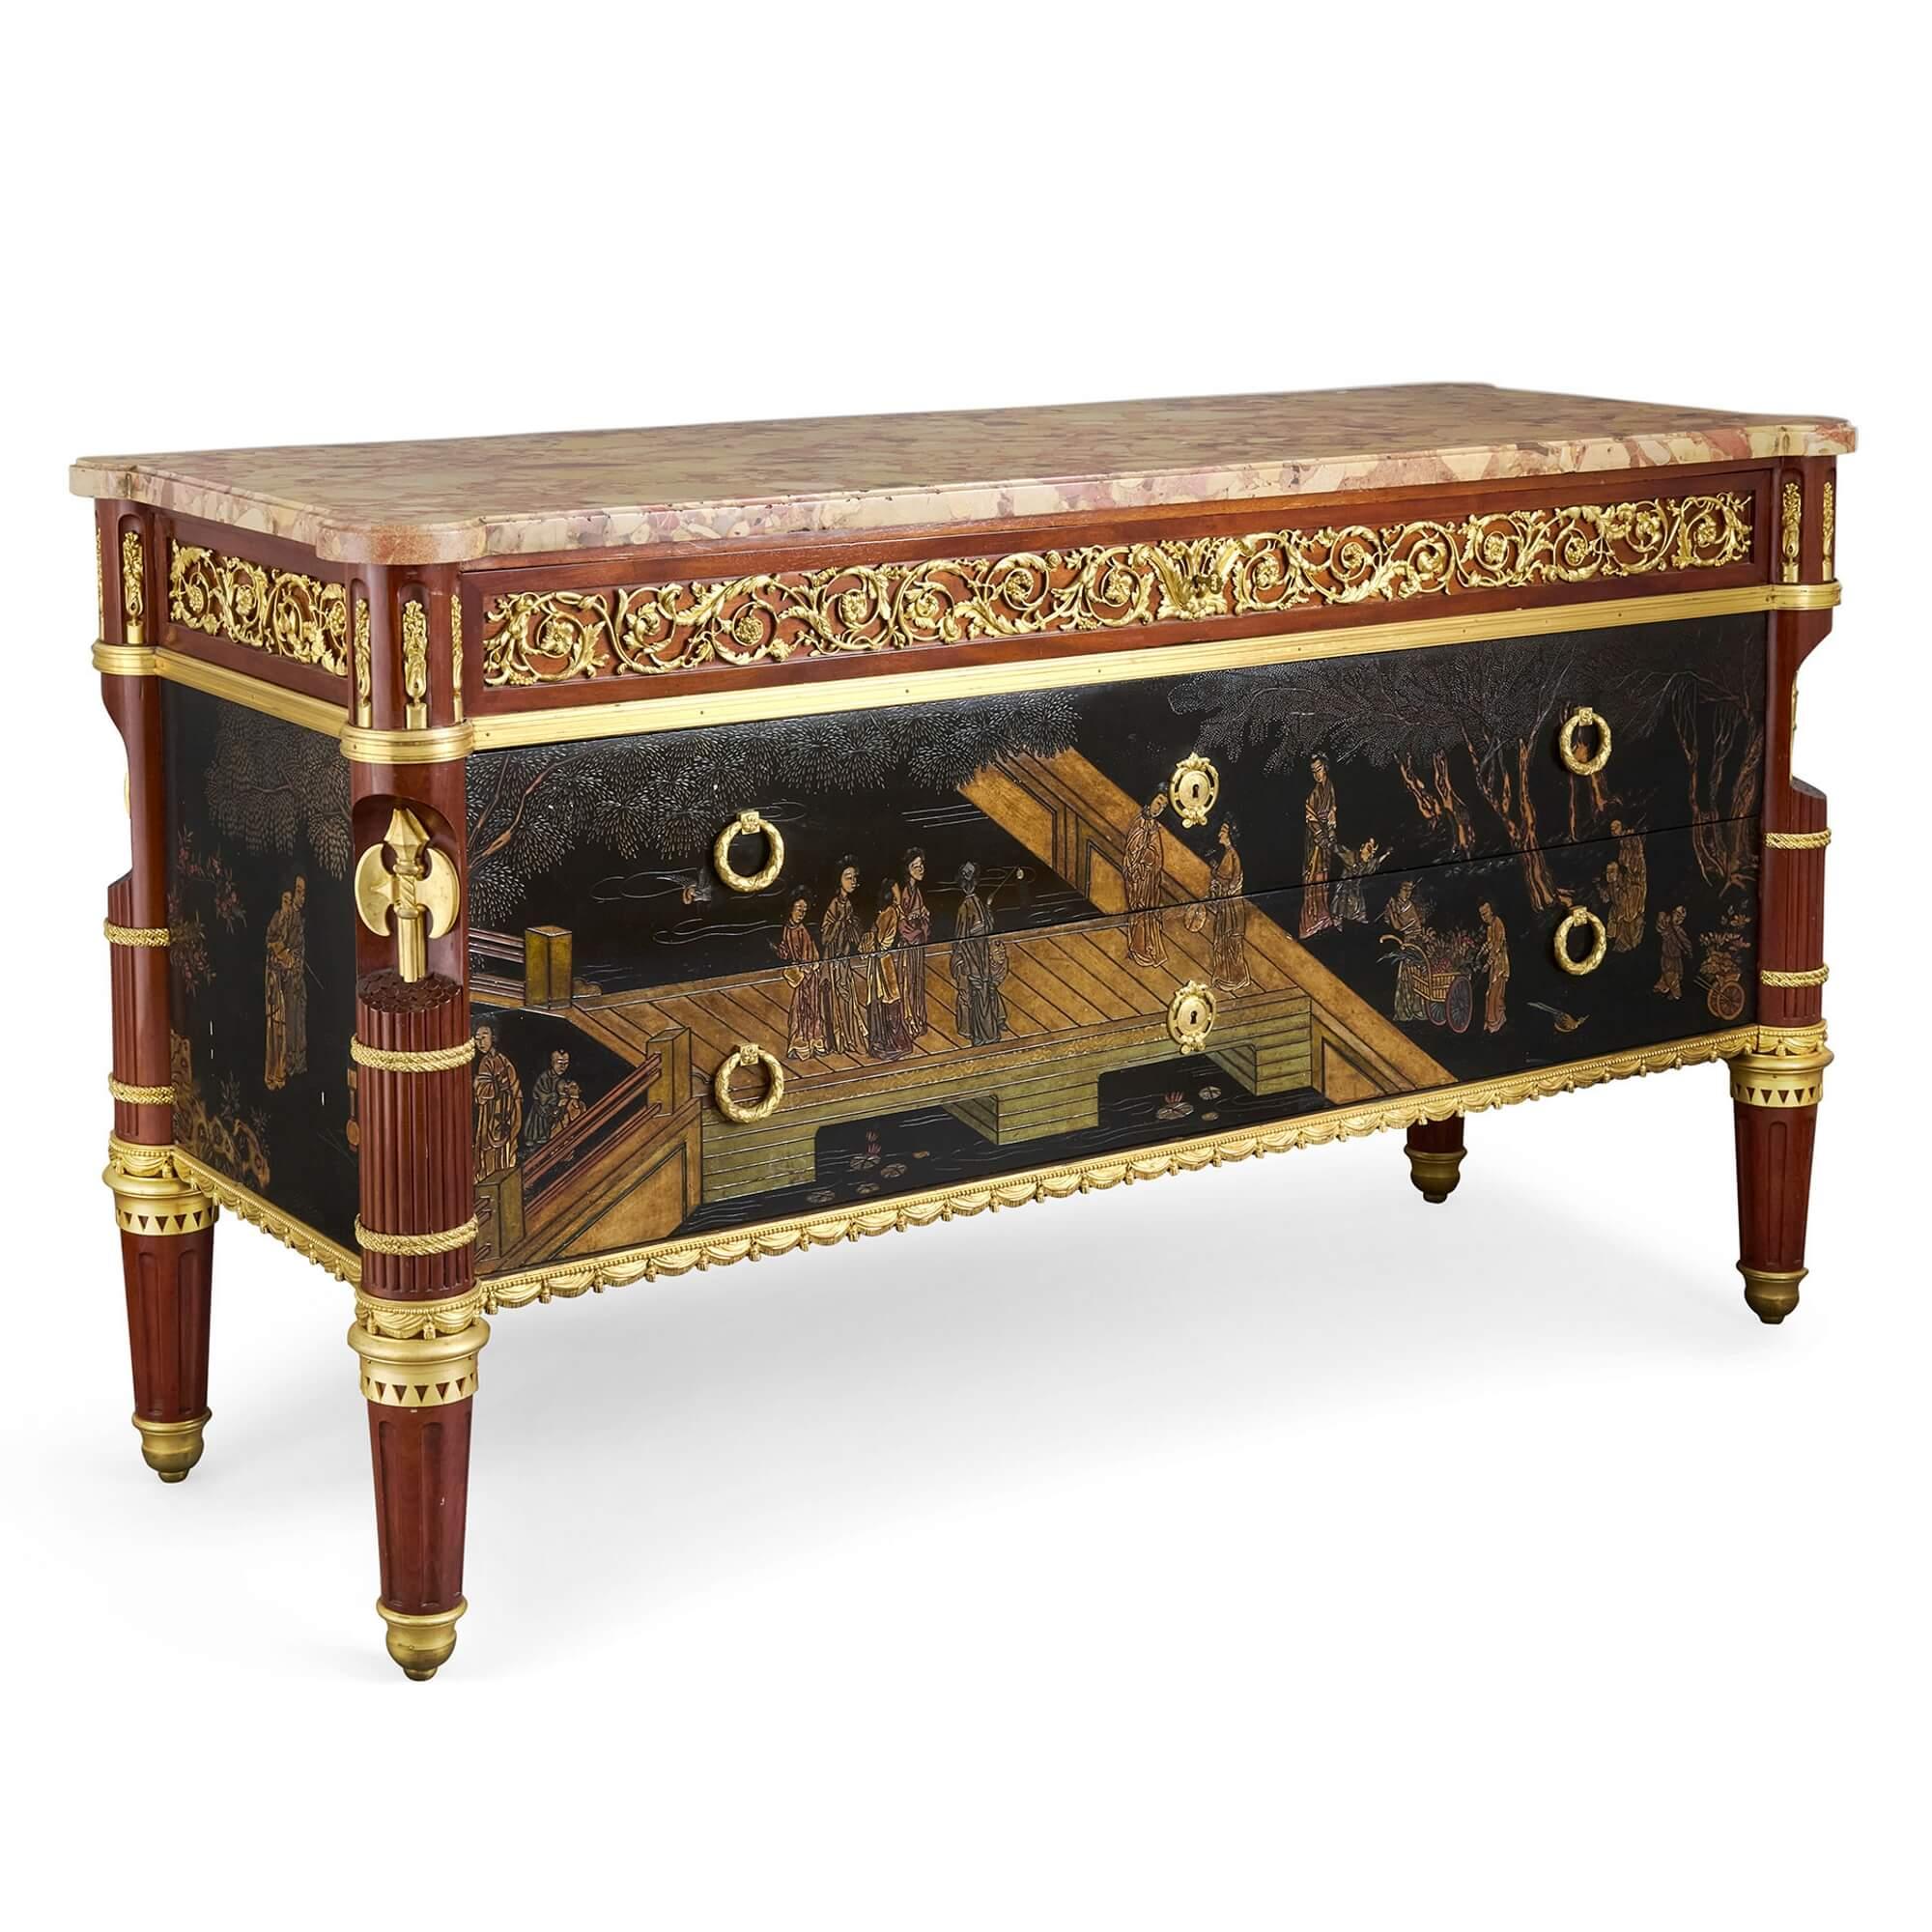 Antique ormolu mounted mahogany and Chinese lacquer commode by Maison Forest
French, Late 19th Century 
Height 95cm, width 166.5cm, depth 61cm

Crafted in late 19th century France by Maison Forest (founded in 1883), a Parisian firm renowned for the